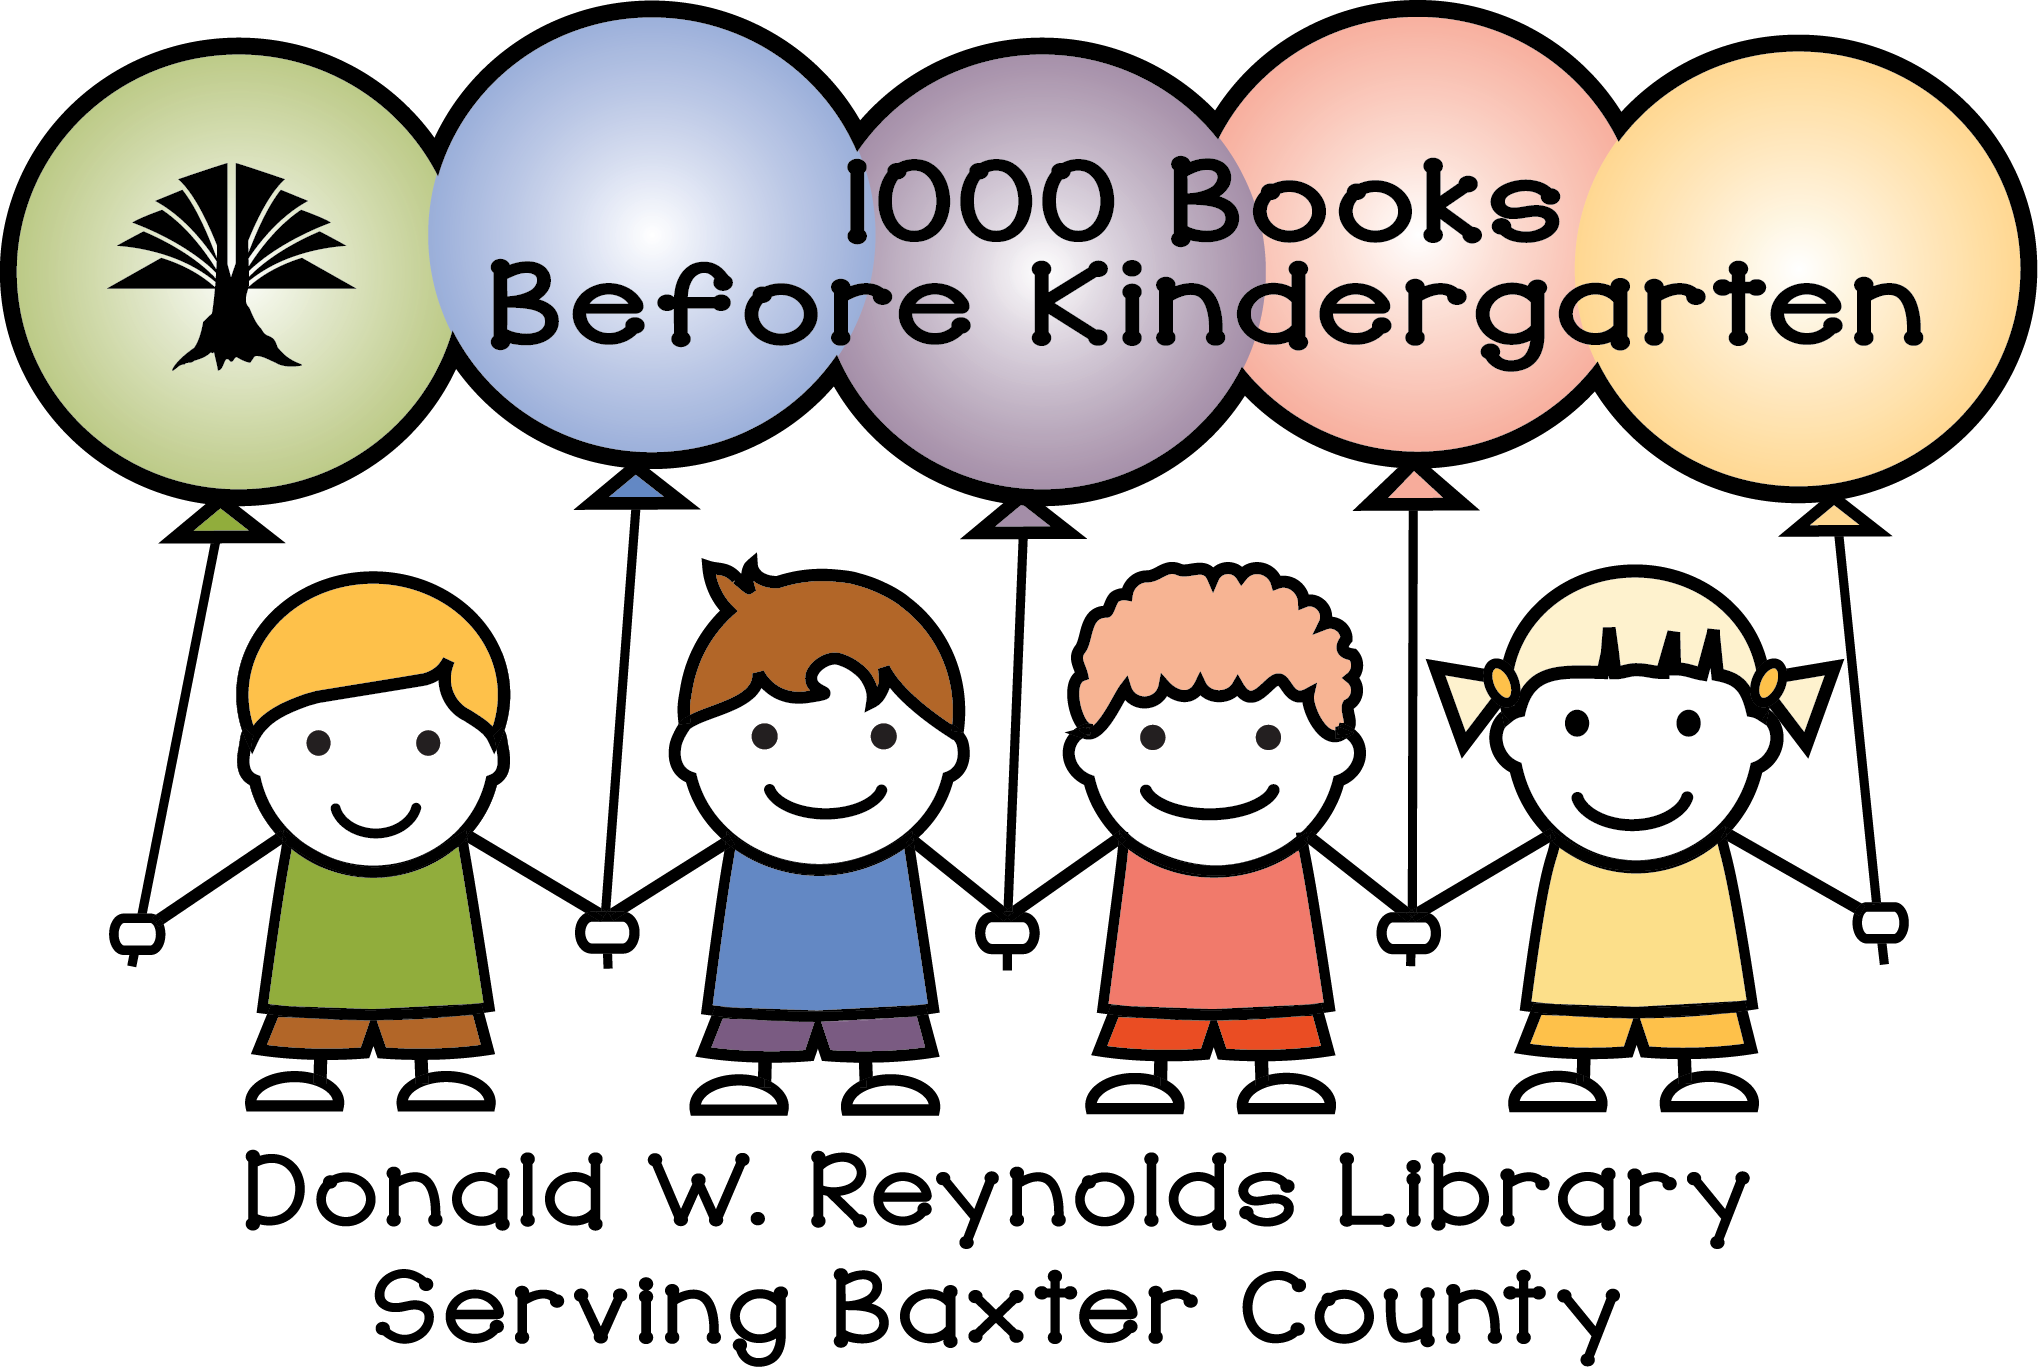 1,000 Books before Kindergarten Donald W. Reynolds Library Serving Baxter County graphic full